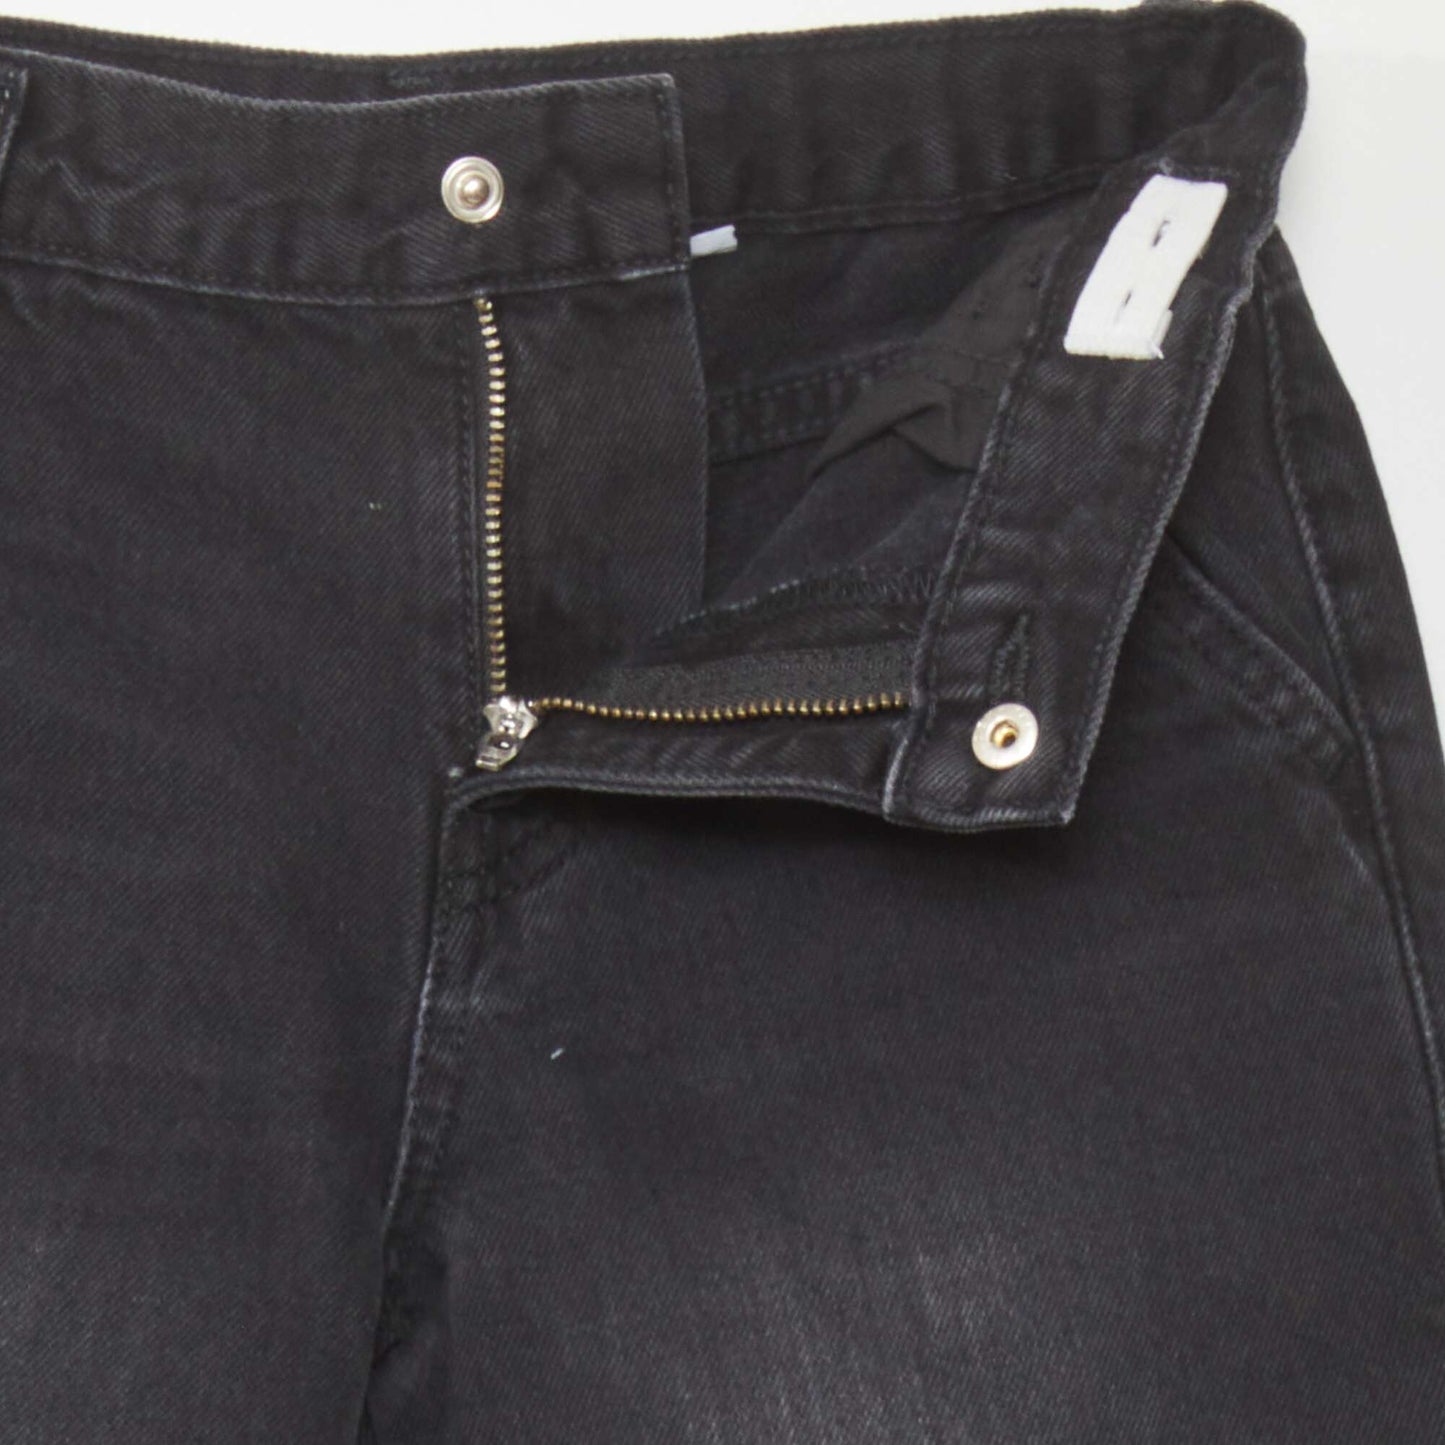 Straight-leg jeans with side pockets GREY